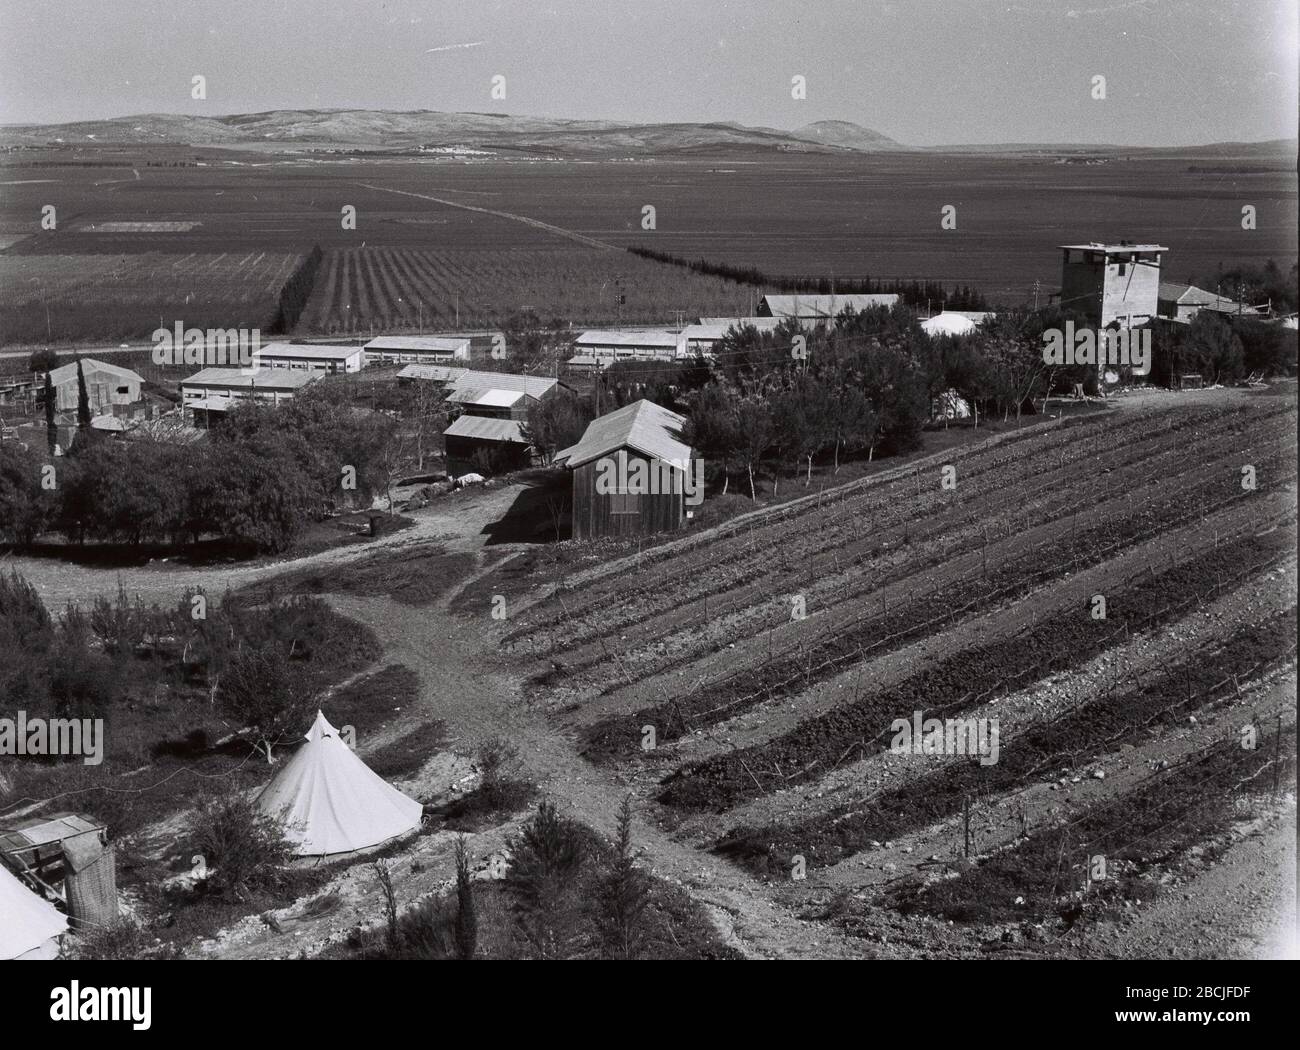 English Kibbutz Hazorea In The Jezreel Valley Ss O E I I N I E U Ss O N E U February 1946 This Is Available From National Photo Collection Of Israel Photography Dept Goverment Press Office Link Under The